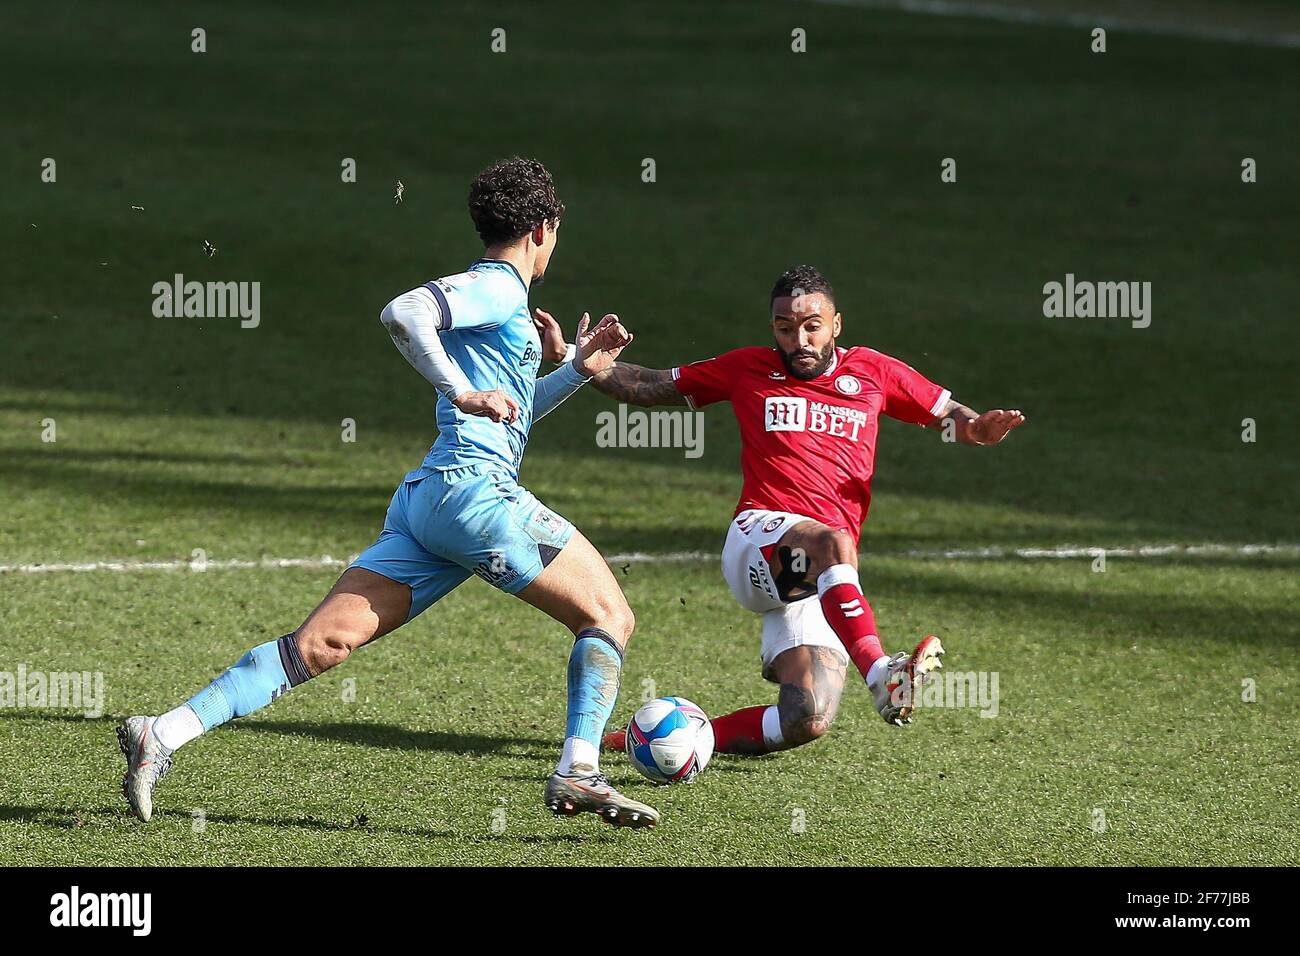 Birmingham, UK. 05th Apr, 2021. Tyler Walker #19 of Coventry City is tackled by Danny Simpson #29 of Bristol City in Birmingham, UK on 4/5/2021. (Photo by Simon Bissett/News Images/Sipa USA) Credit: Sipa USA/Alamy Live News Stock Photo